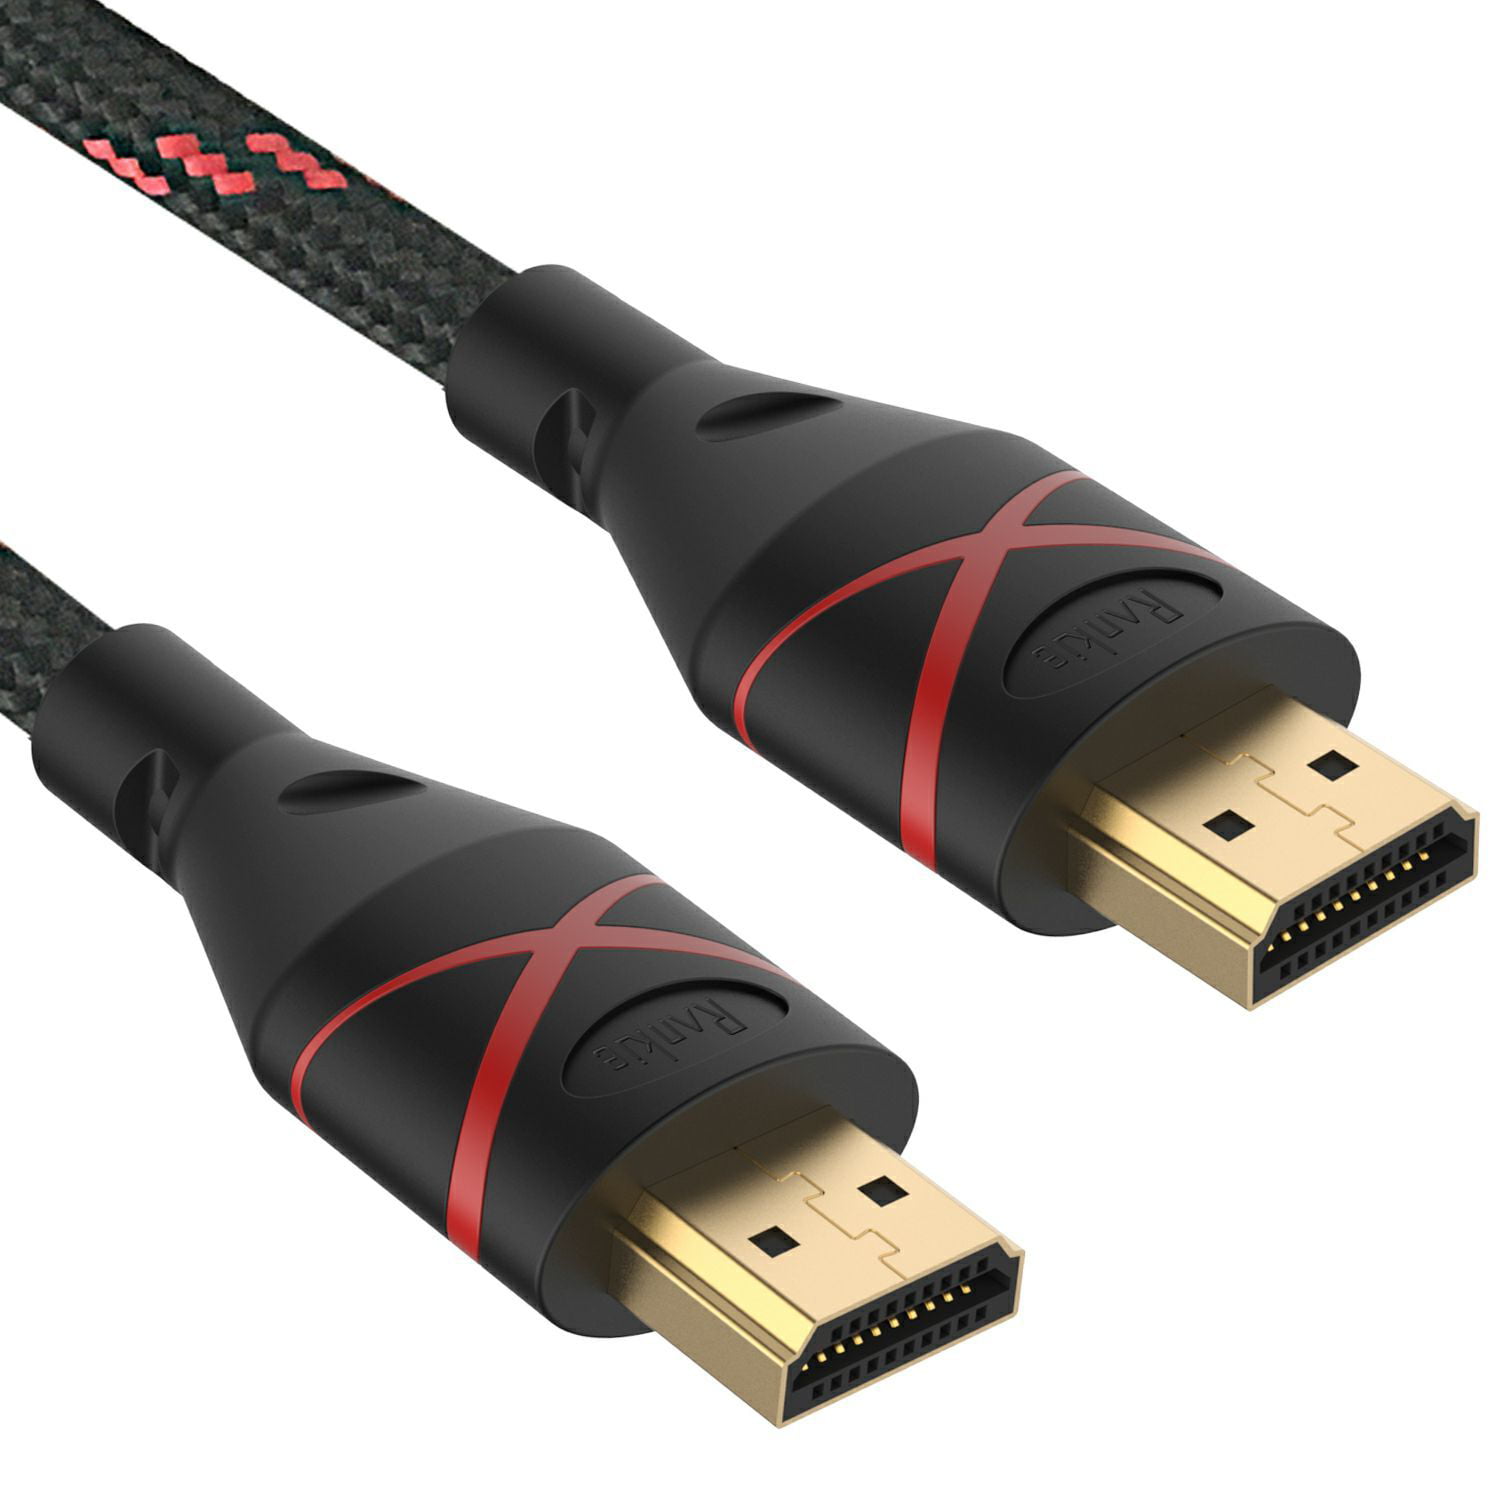 HDMI Cable, Rankie 6ft Nylon Braided Extremely Durable High-Speed HDMI